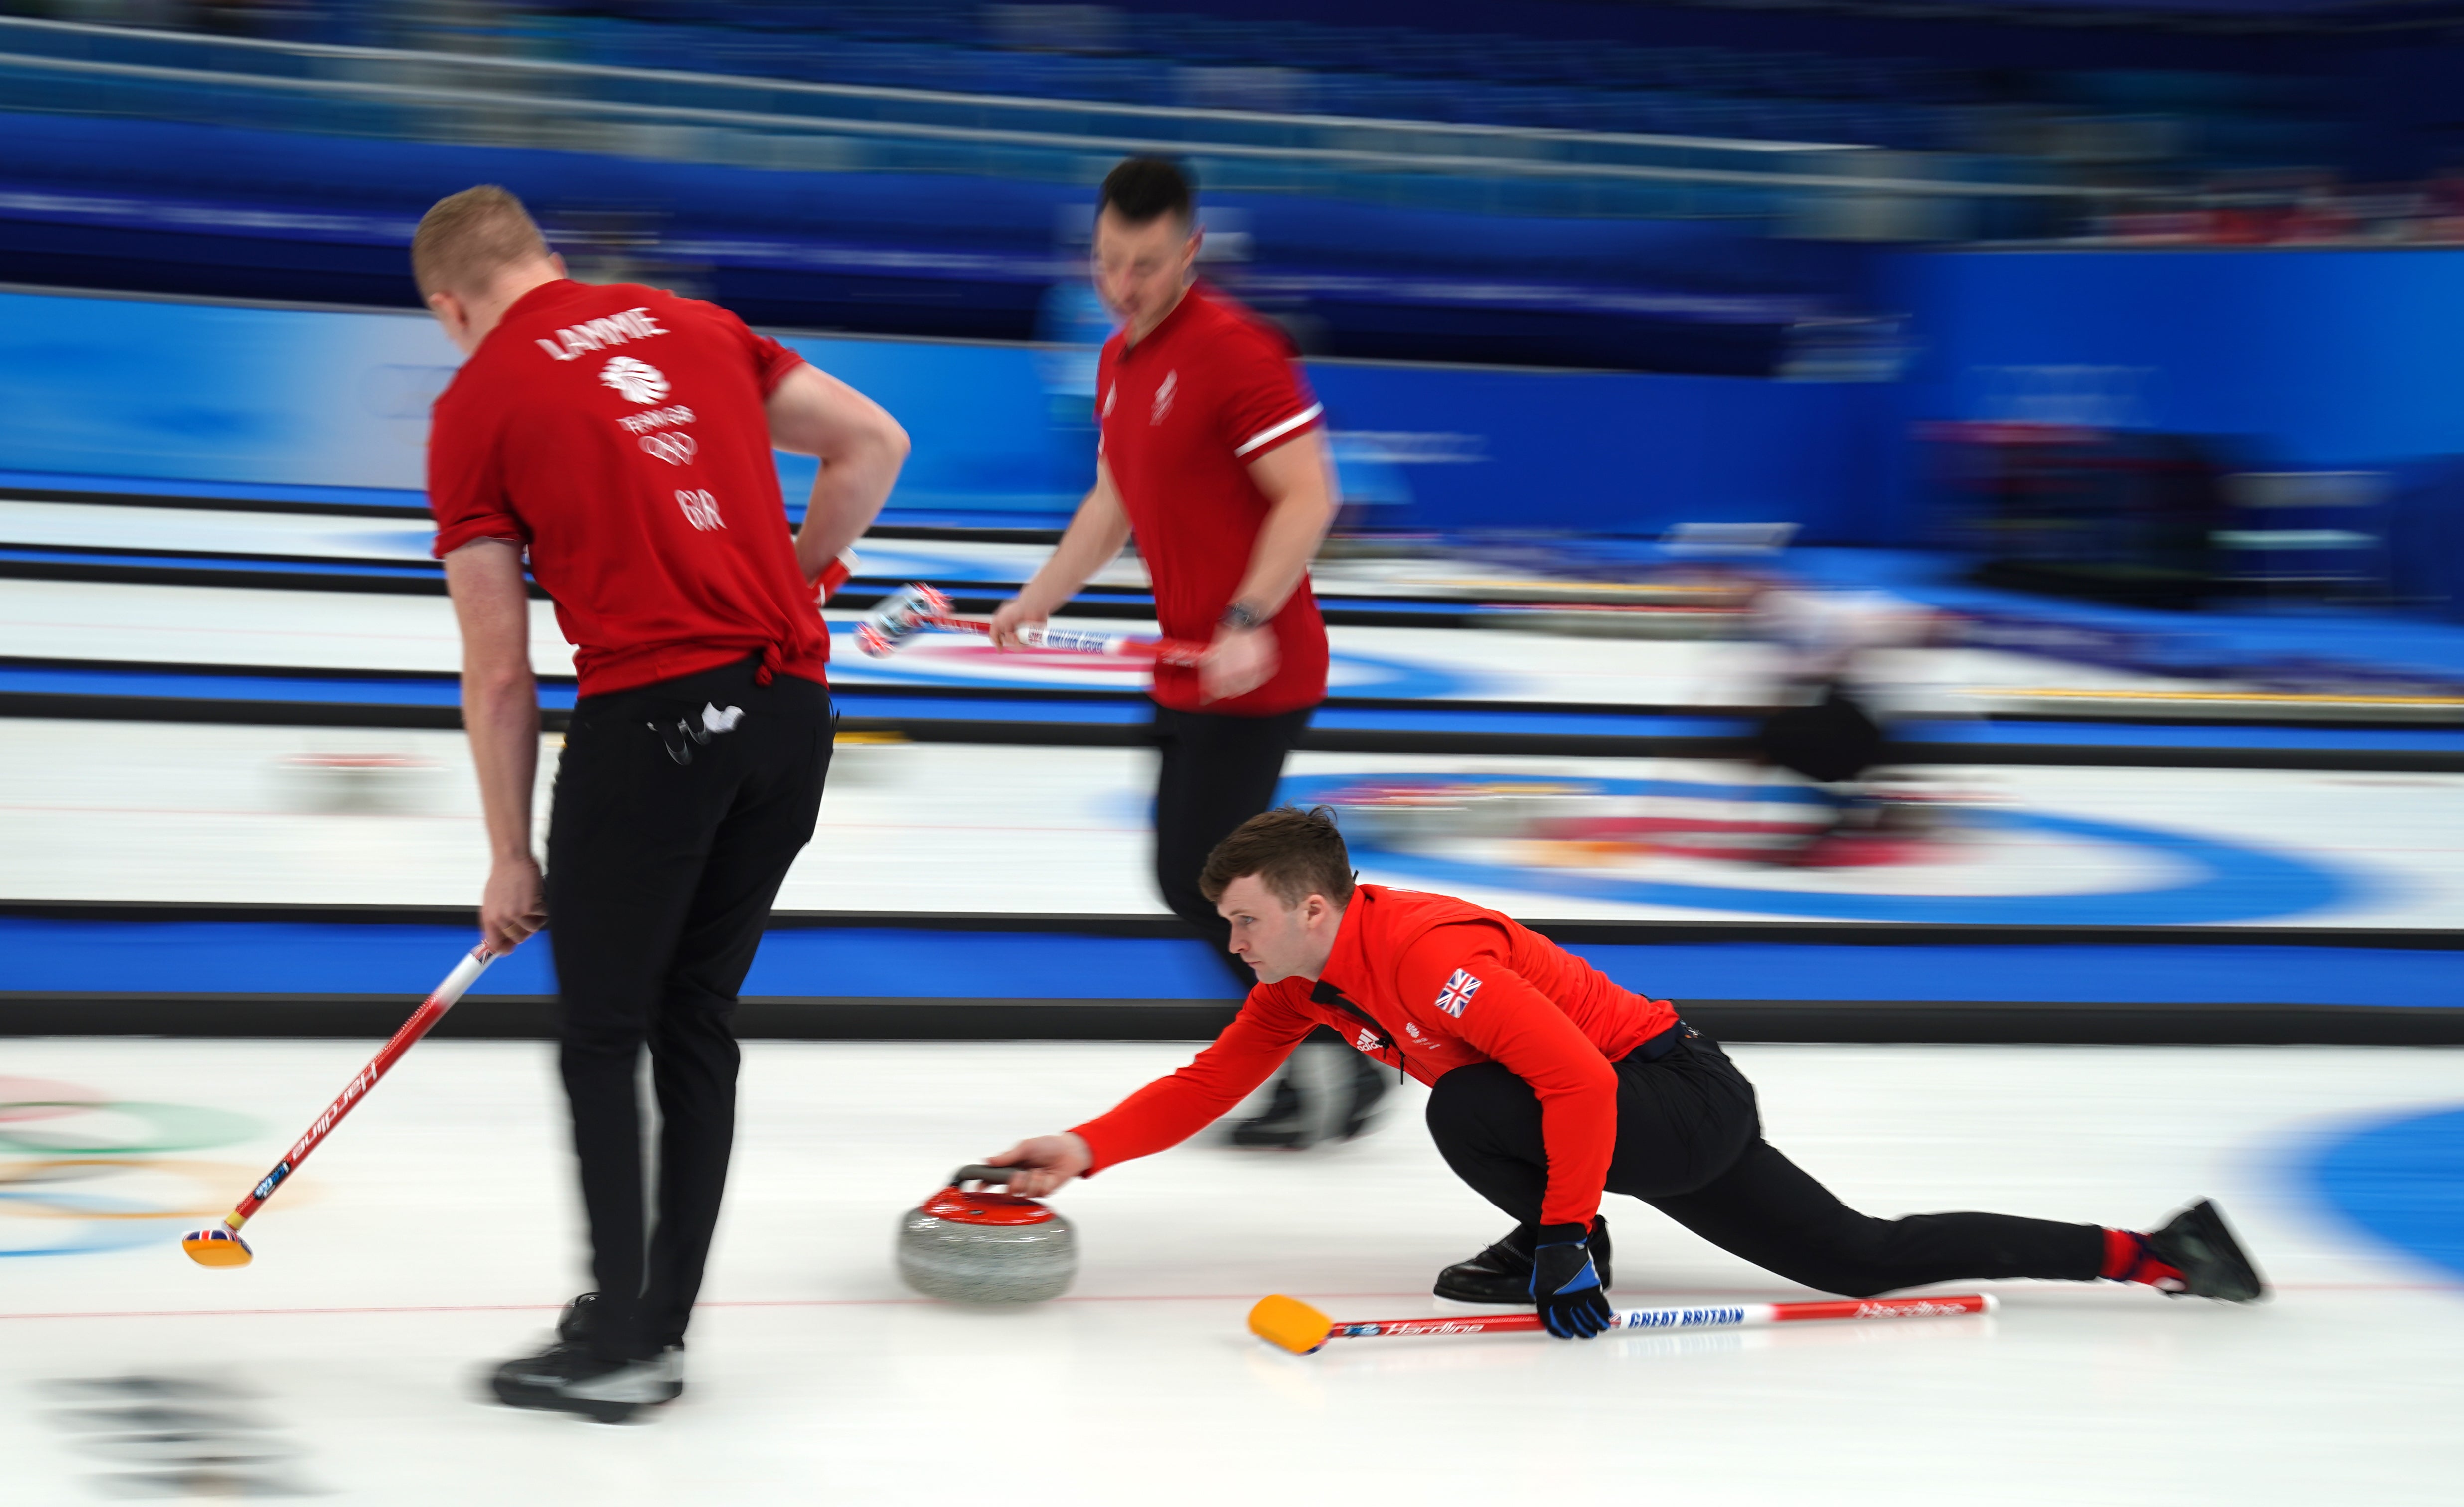 Bruce Mouat’s men’s curling team said they would embrace the challenge of ‘saving’ these Winter Olympics for Britain (Andrew Milligan/PA)